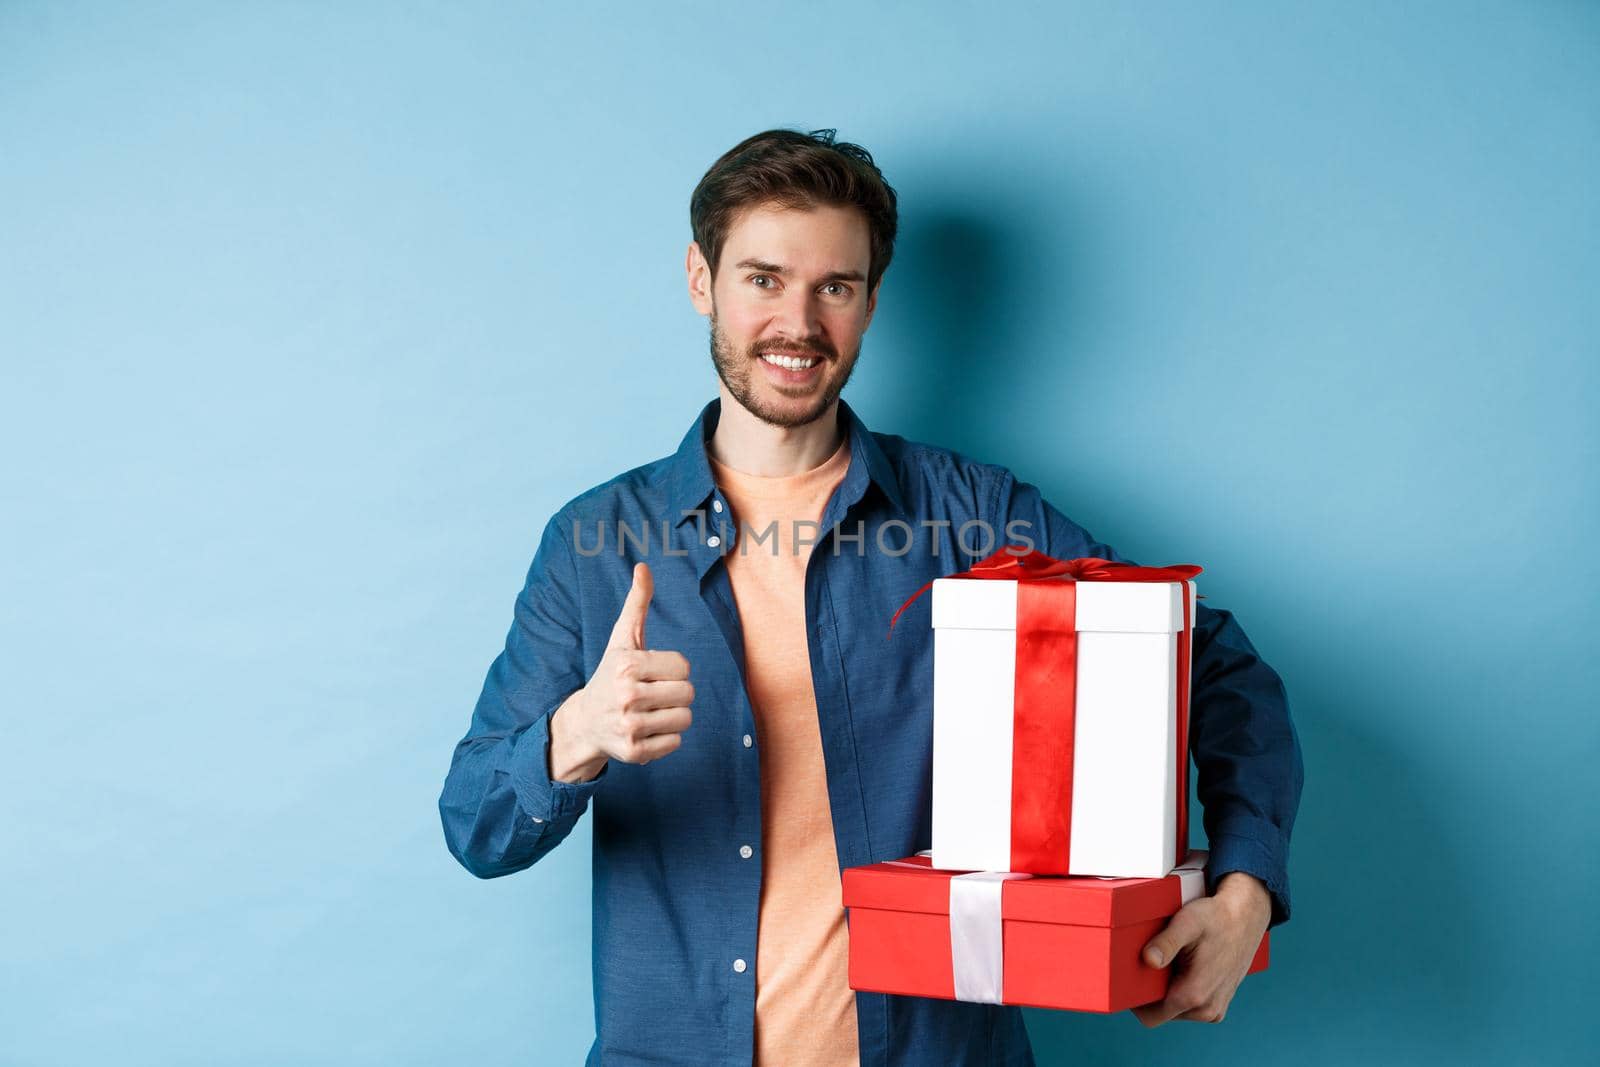 Smiling man holding romantic gifts and showing thumbs-up, celebrating Valentines day, buying presents for lover, standing over blue background by Benzoix